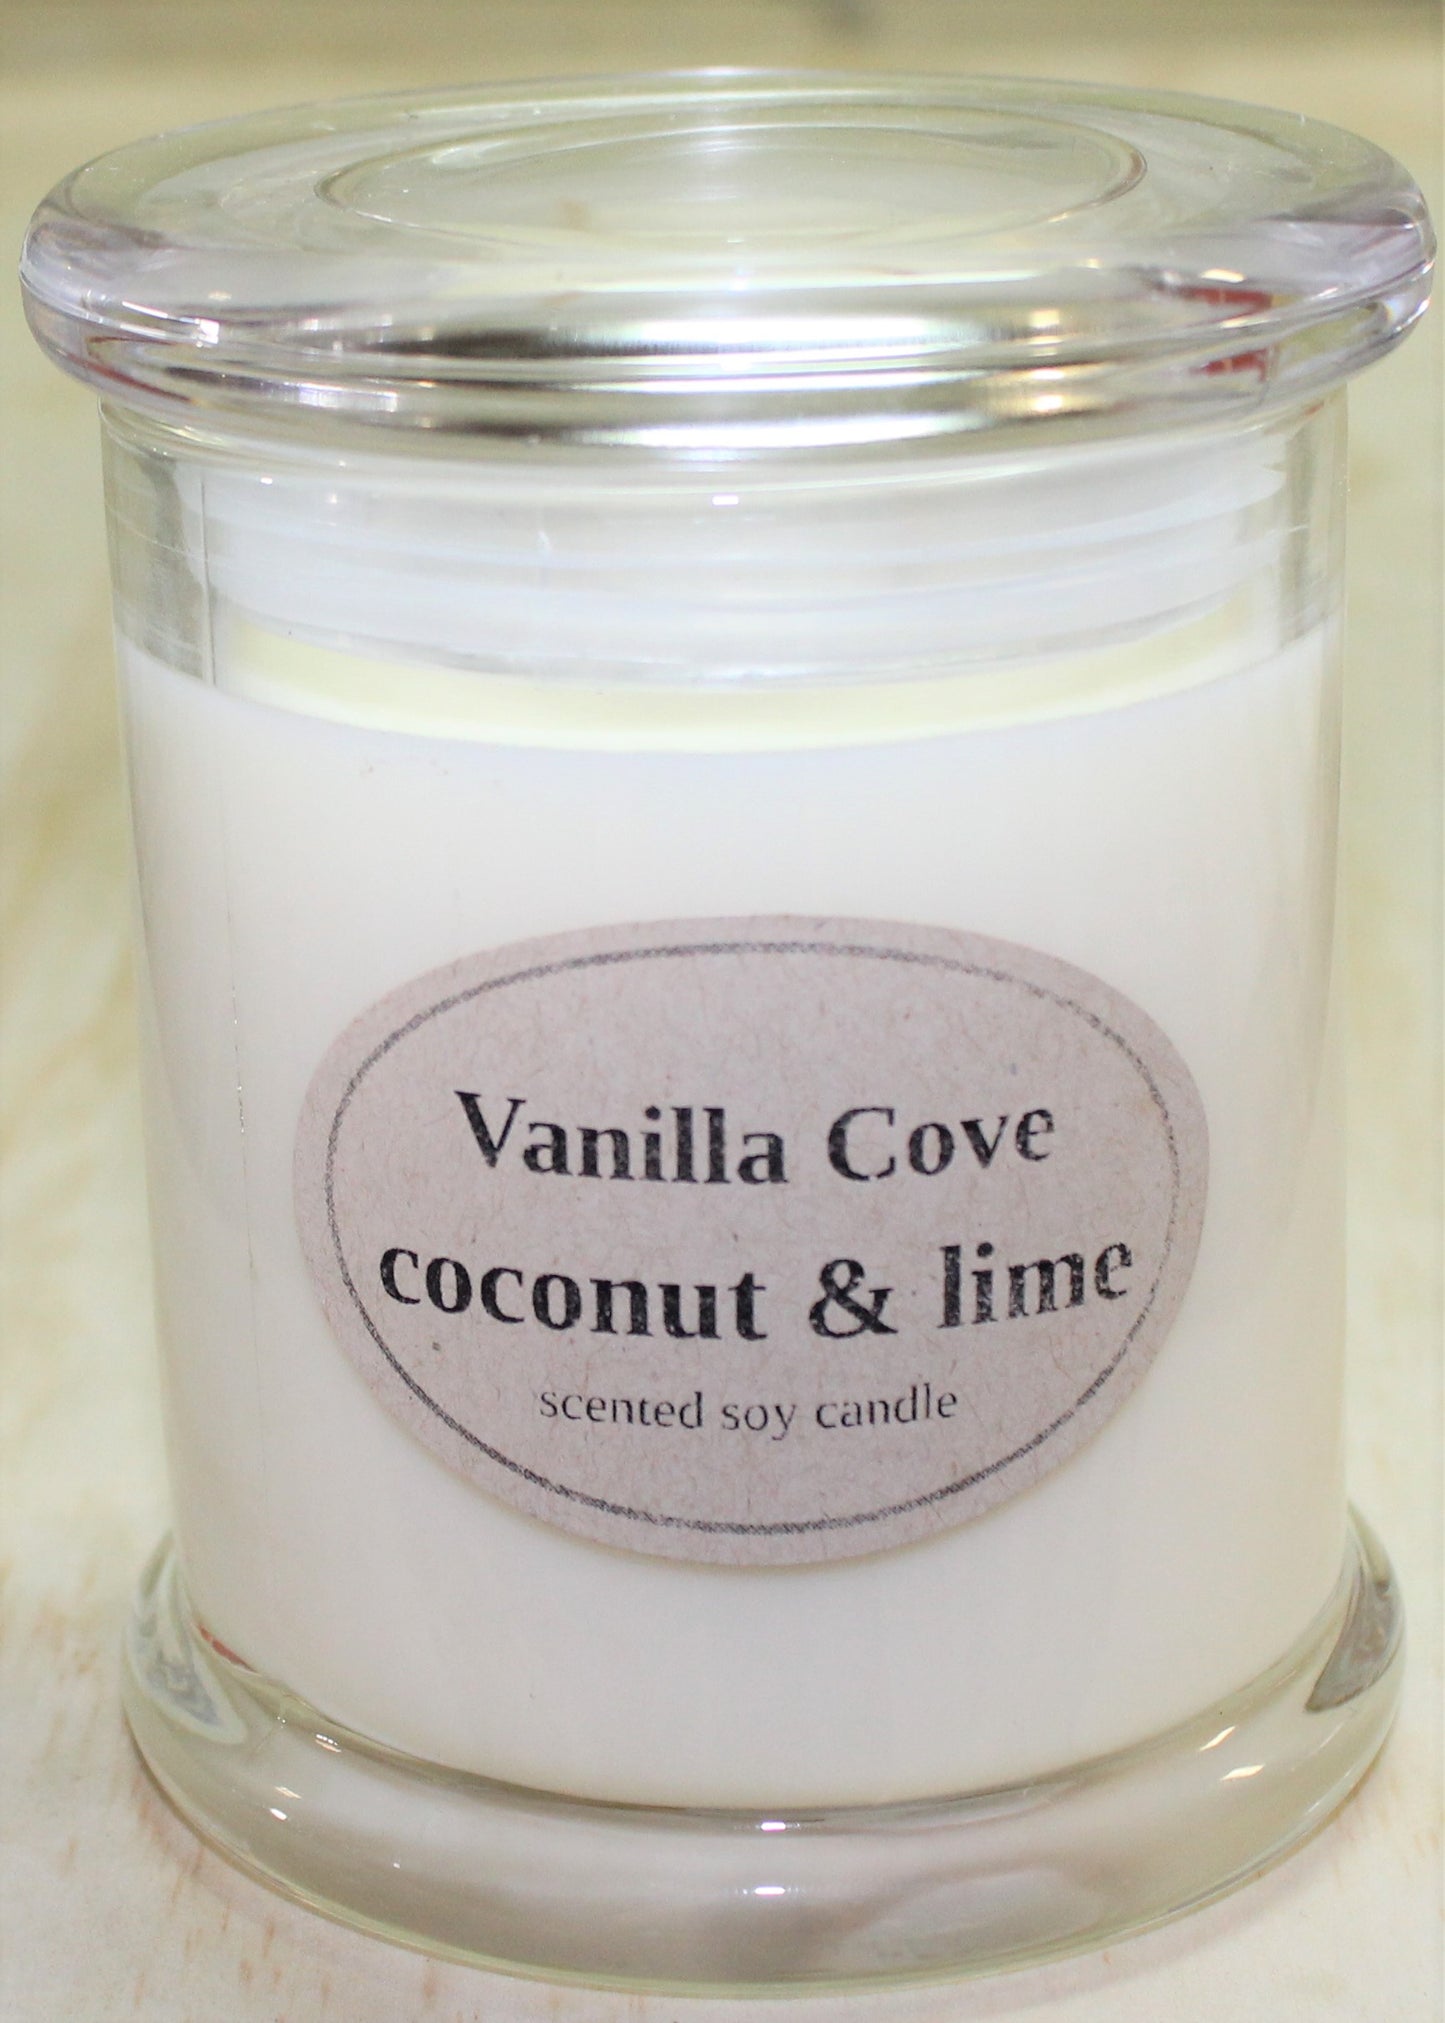 Vanilla Cove Soy Candle 50 hour Coconut and Lime Fragrance in clear glass jar and glass lid